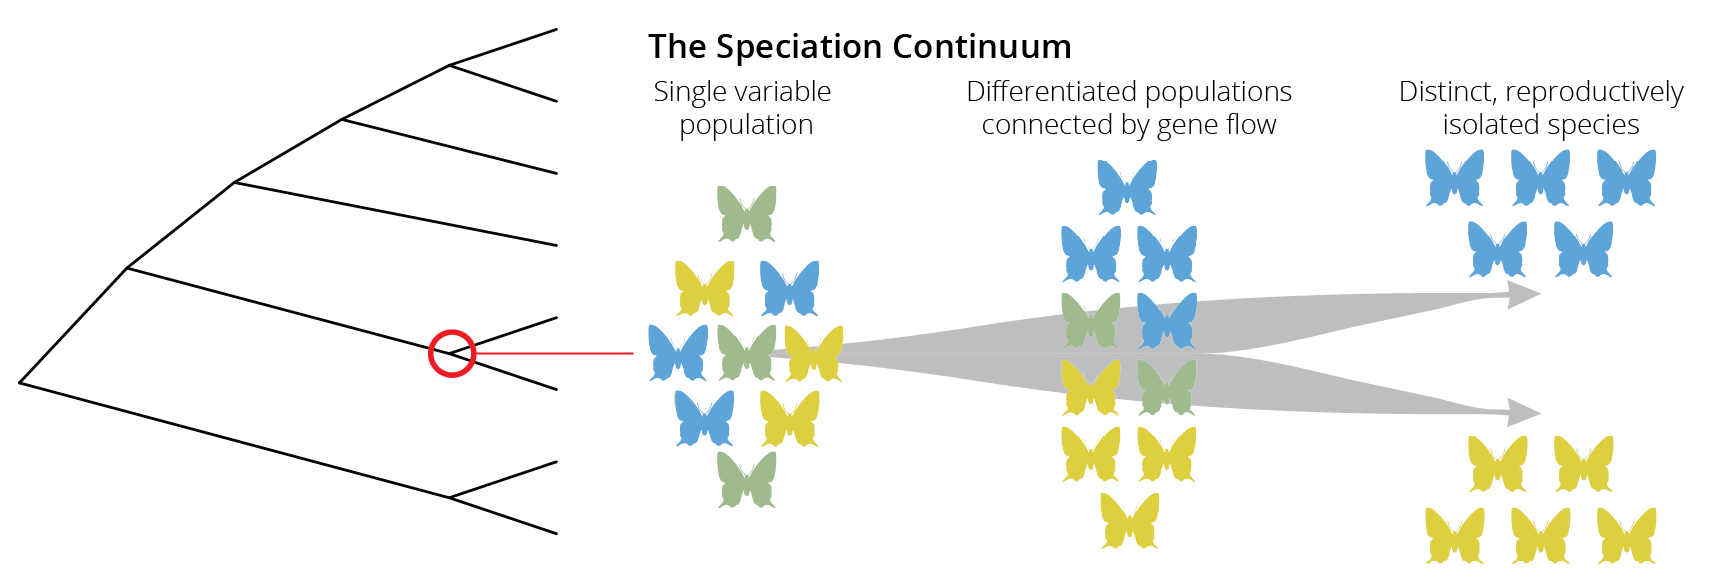 Speciation is not typically an instantaneous process. Rather, species evolve gradually along a speciation continuum that ranges from a single population, to differentiated populations connected by gene flow, to distinct and reproductively isolated populations.